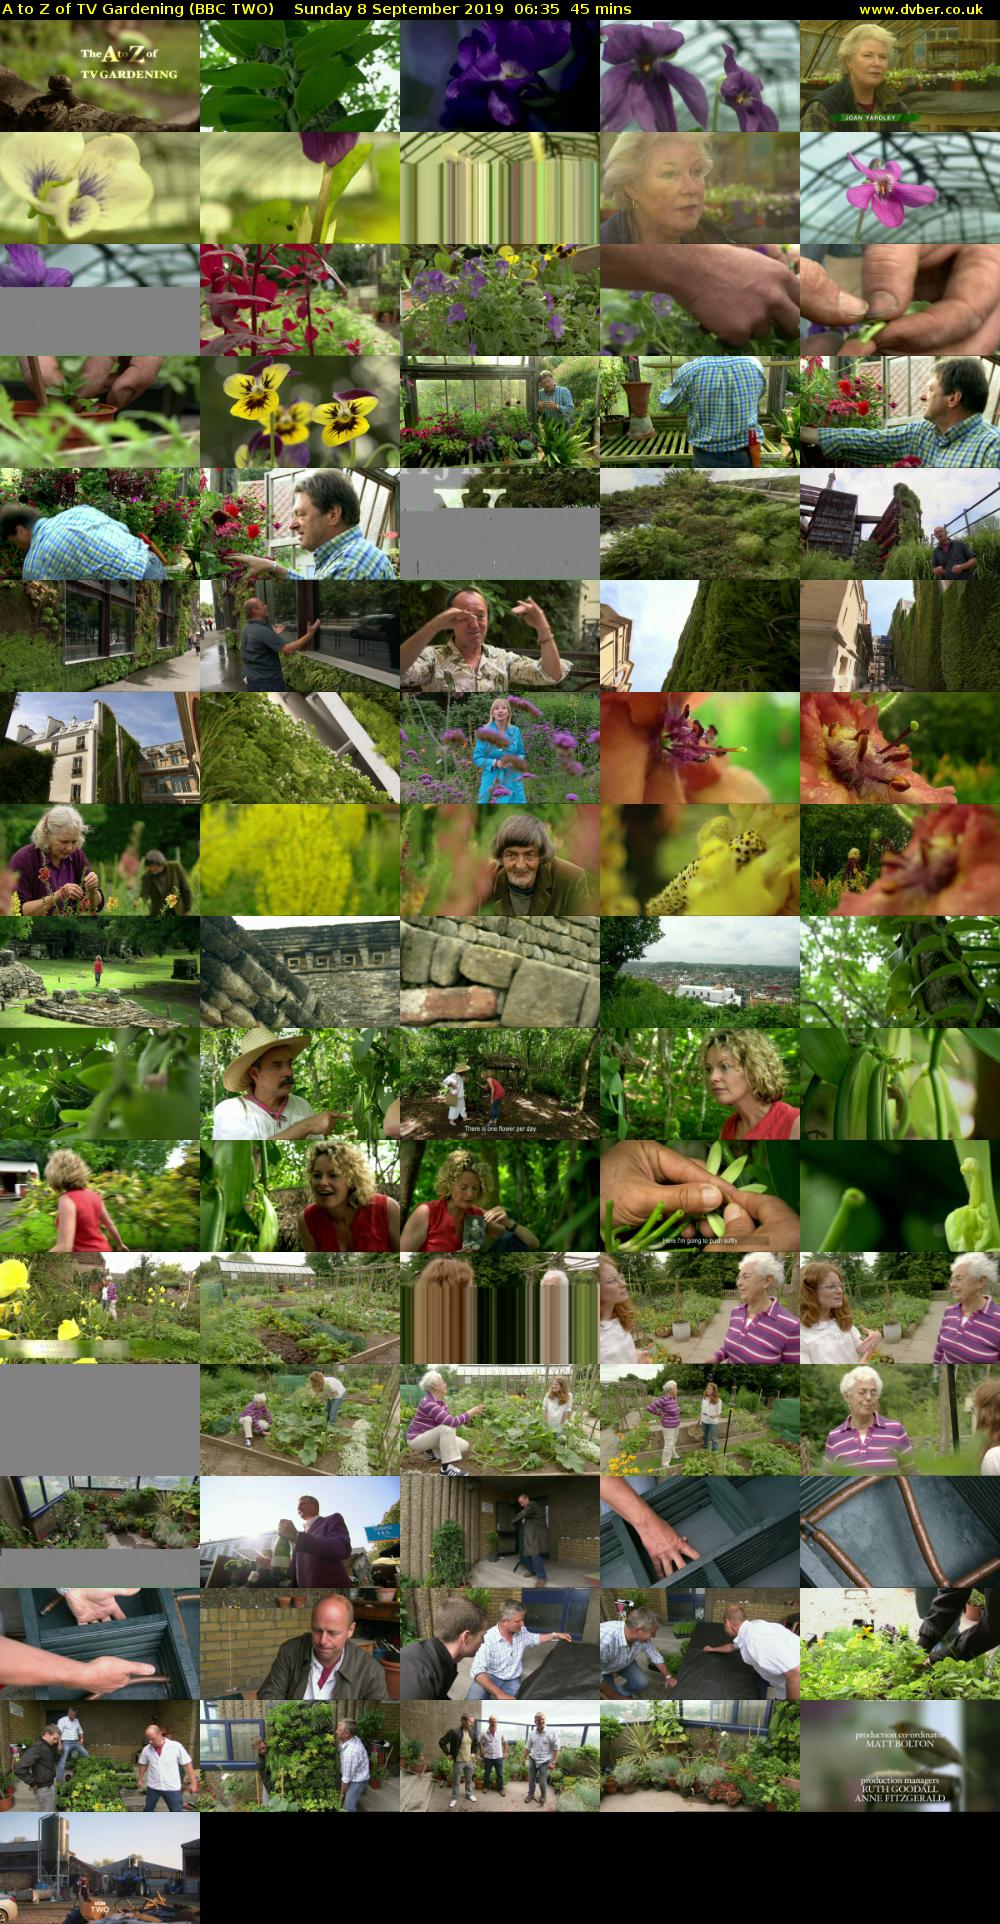 A to Z of TV Gardening (BBC TWO) Sunday 8 September 2019 06:35 - 07:20